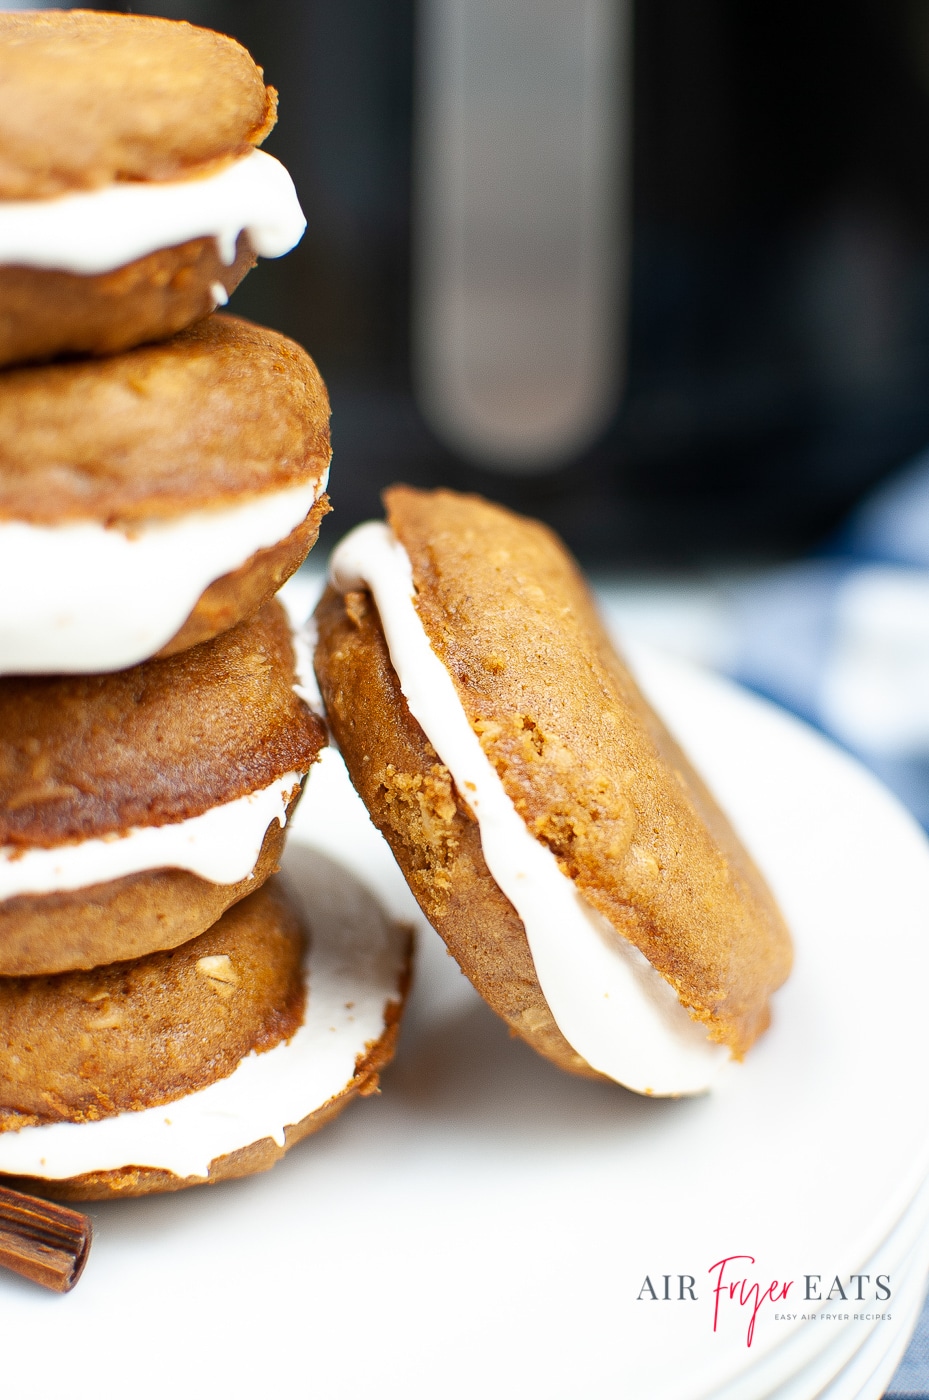 vertical photo of 4 oatmeal creme pies with one pie on the side leaning on the stack of oatmeal pies. White cream is slathered between oatmeal cookies, black air fryer in back with silver handle.